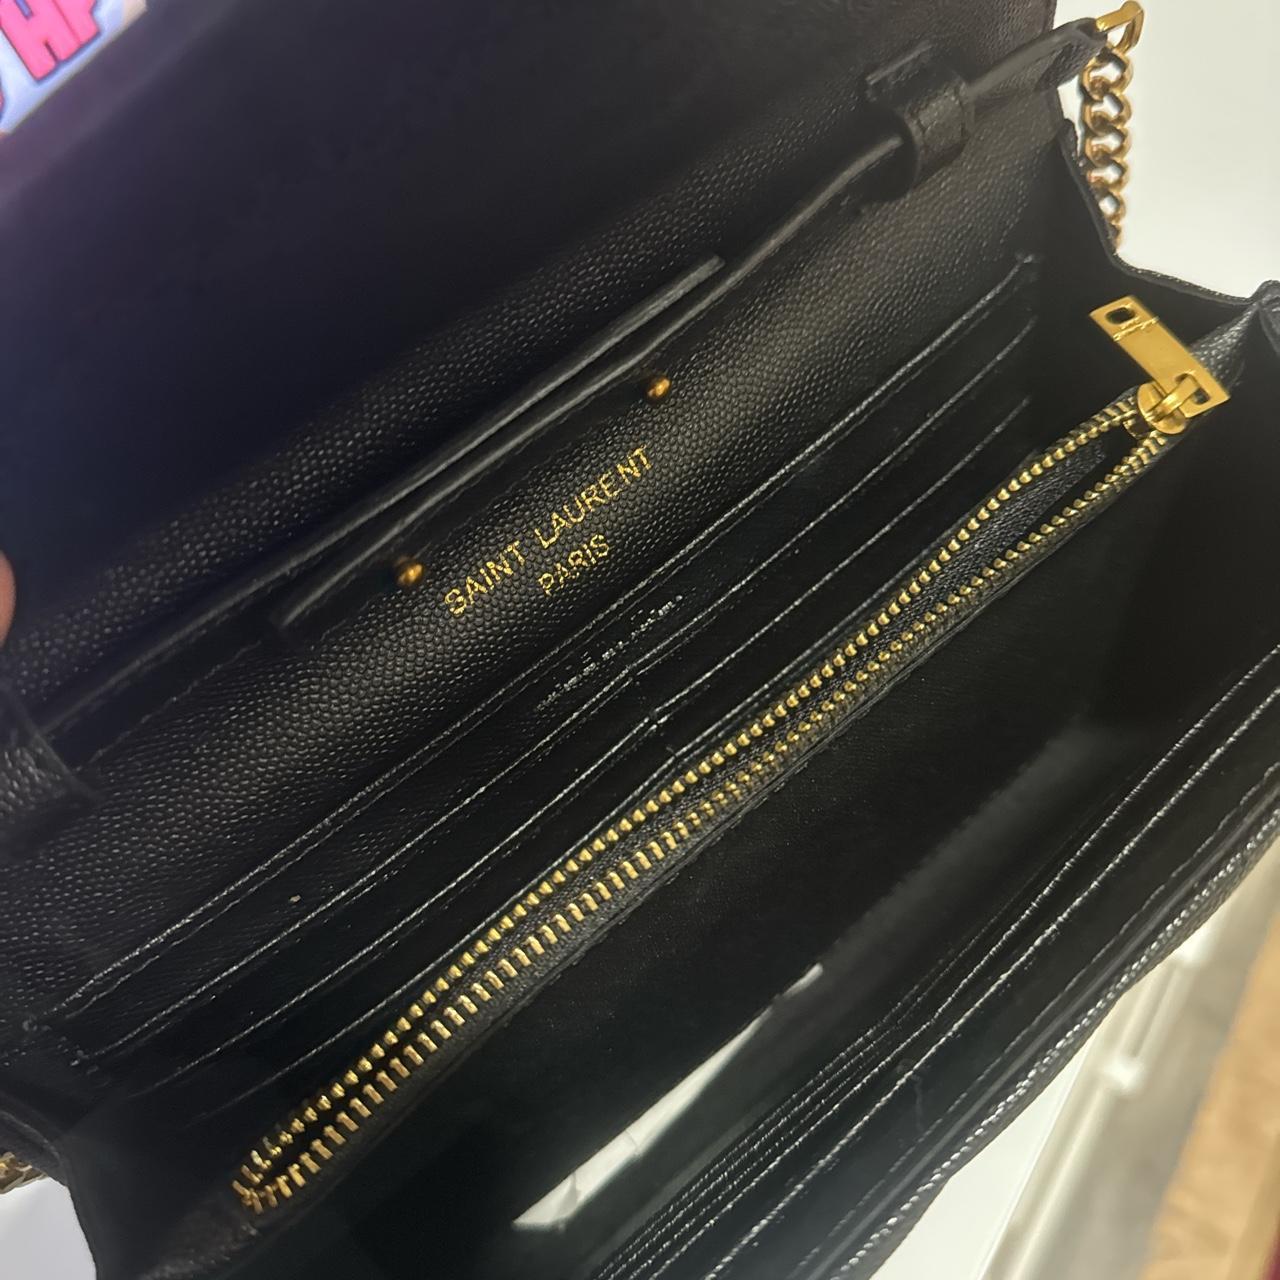 “YSL” leather handbag with chain repop from... - Depop